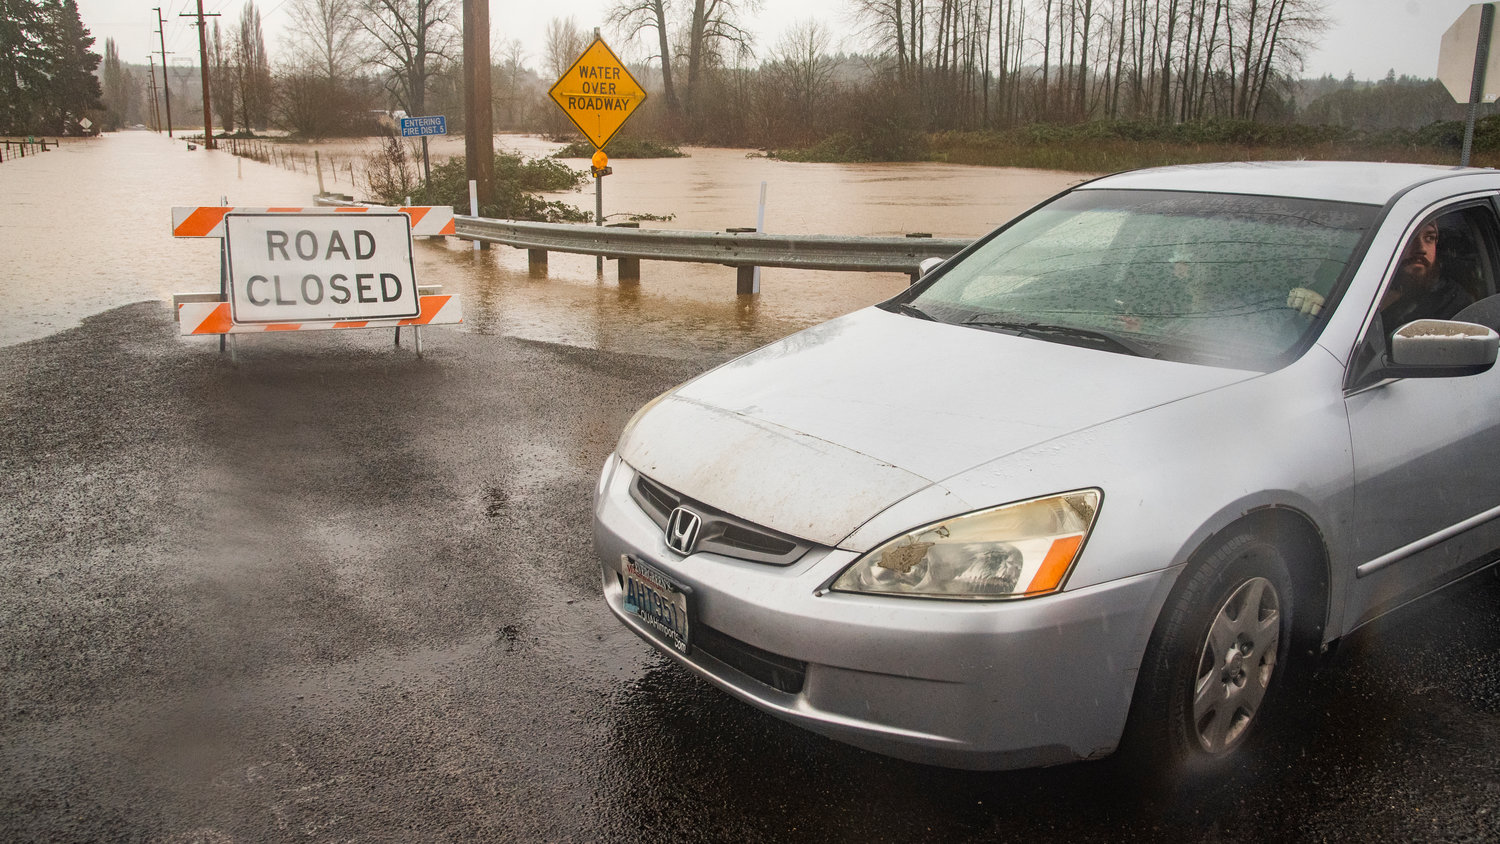 Signs block Hamilton Road in Chehalis as water levels continue to rise and flood roadways across Lewis County.